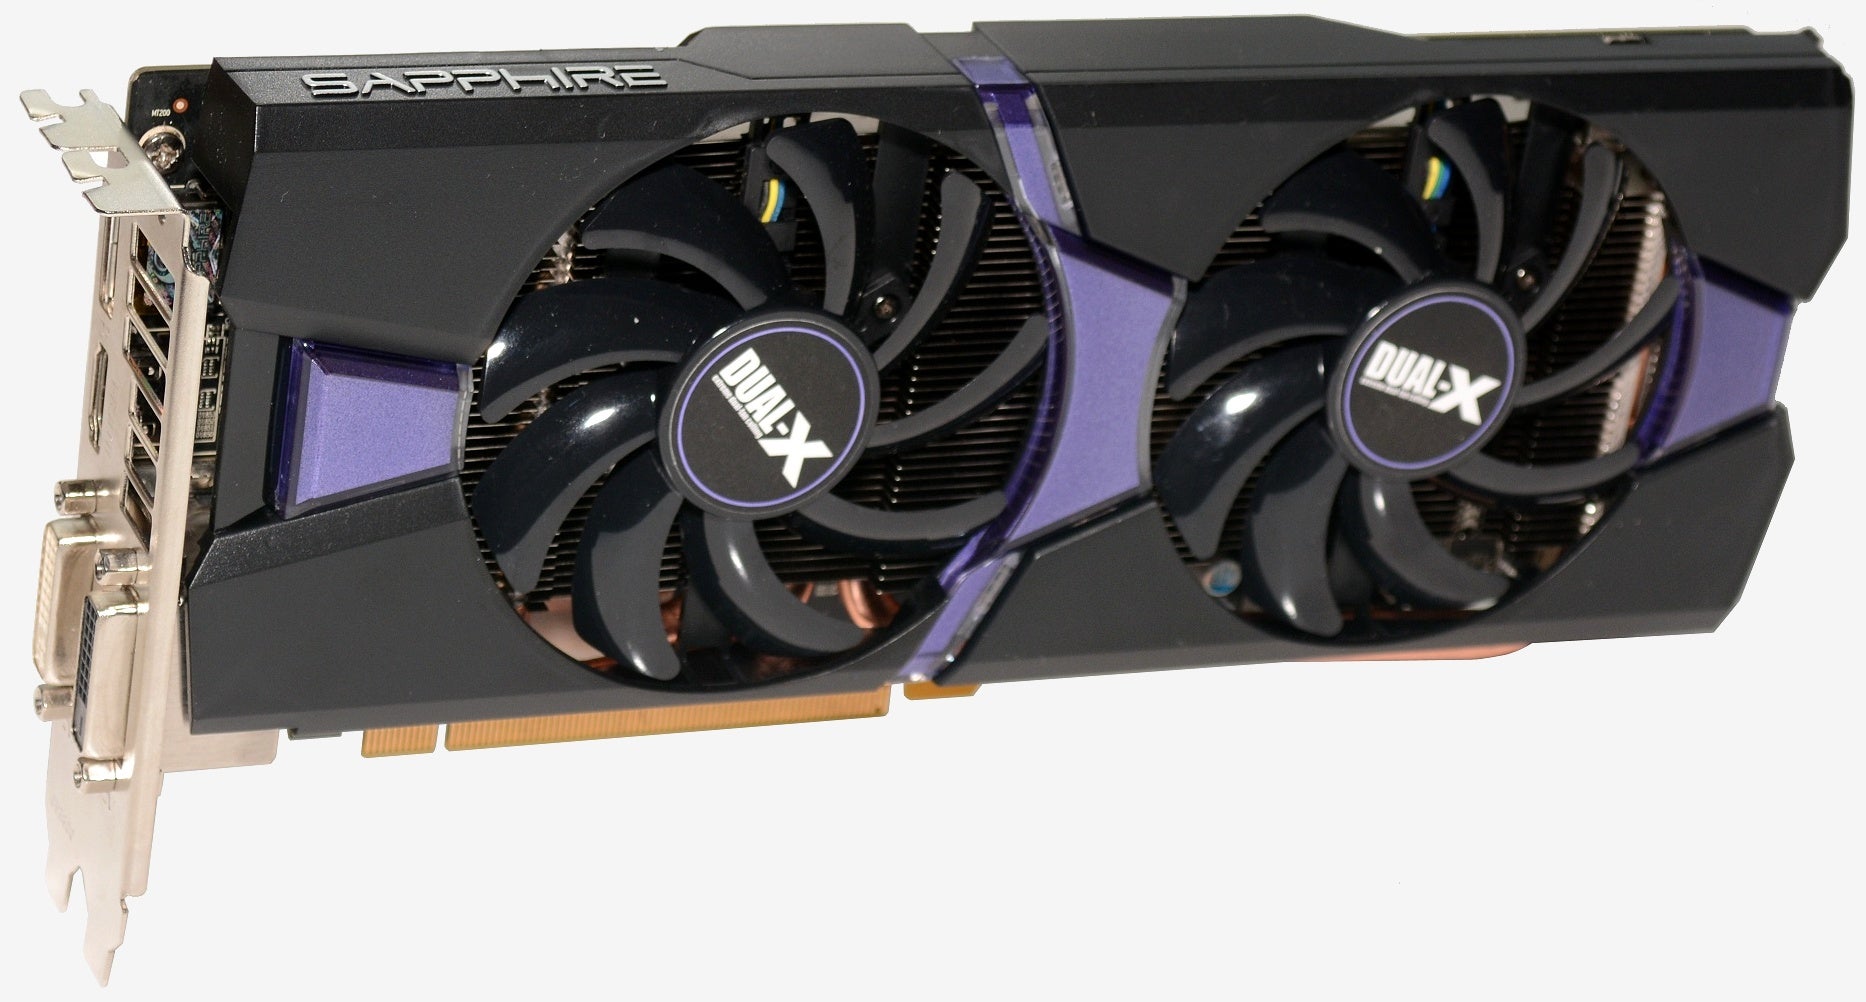 AMD Radeon R9 285 Review: The New $US250 Video Card To Beat